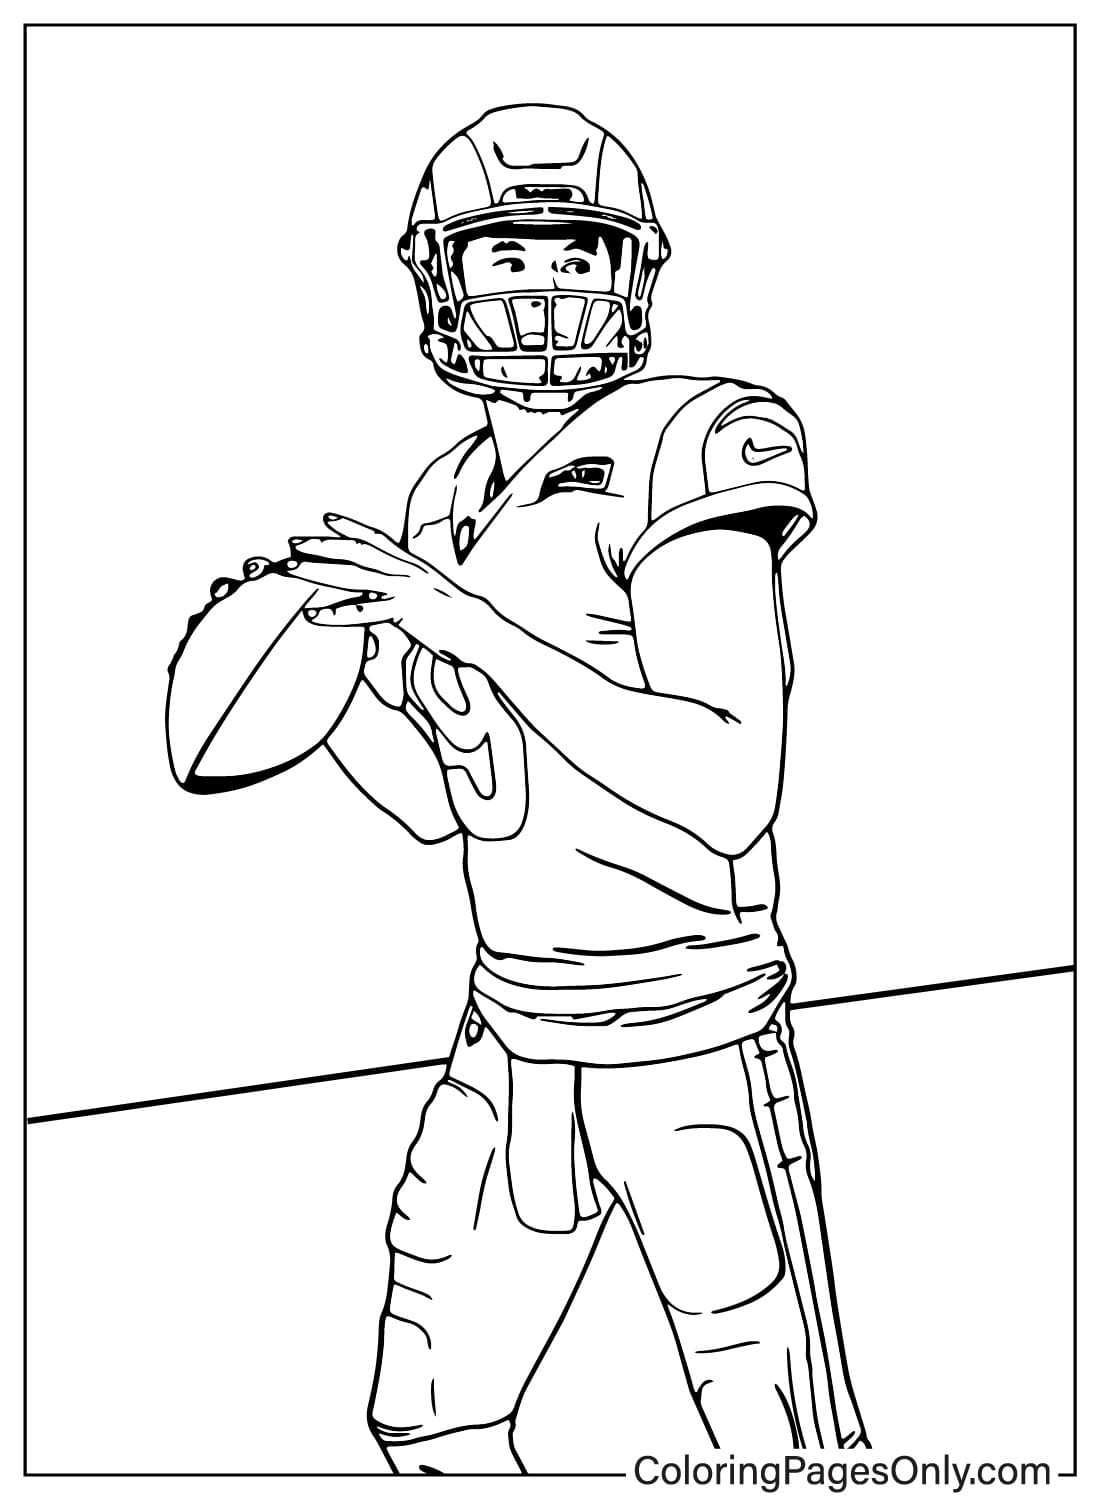 Cooper Kupp Coloring Page - Free Printable Coloring Pages